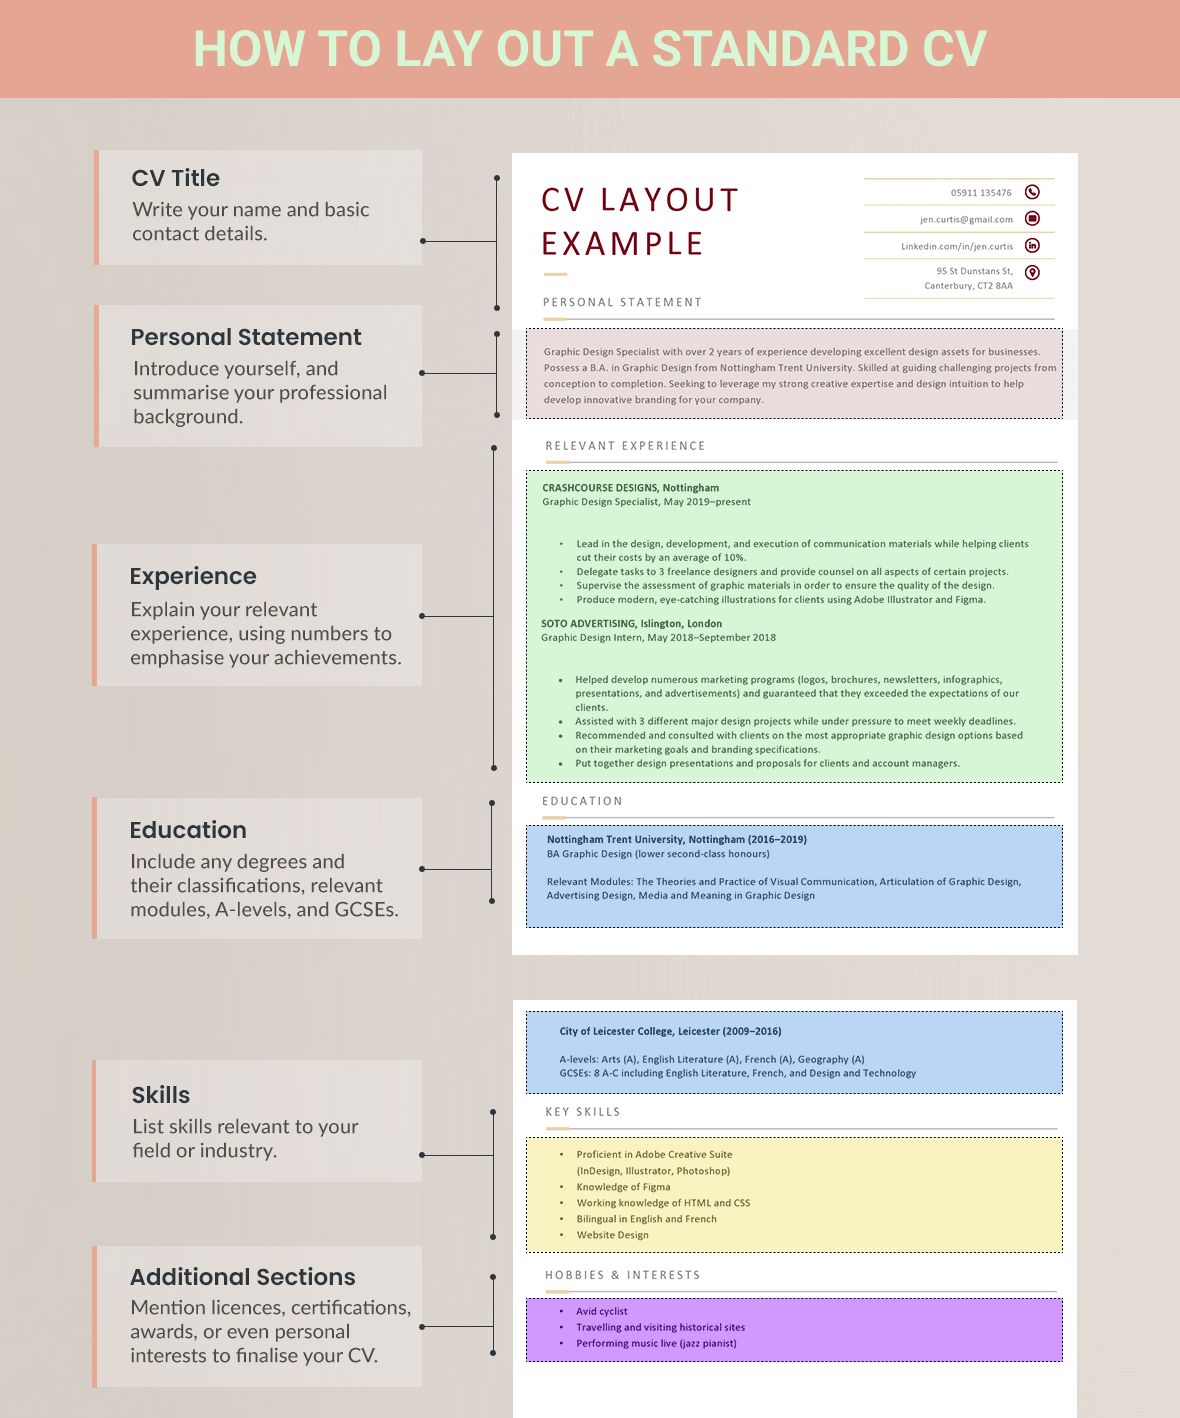 A CV layout infographic that shows how to set out a standard CV